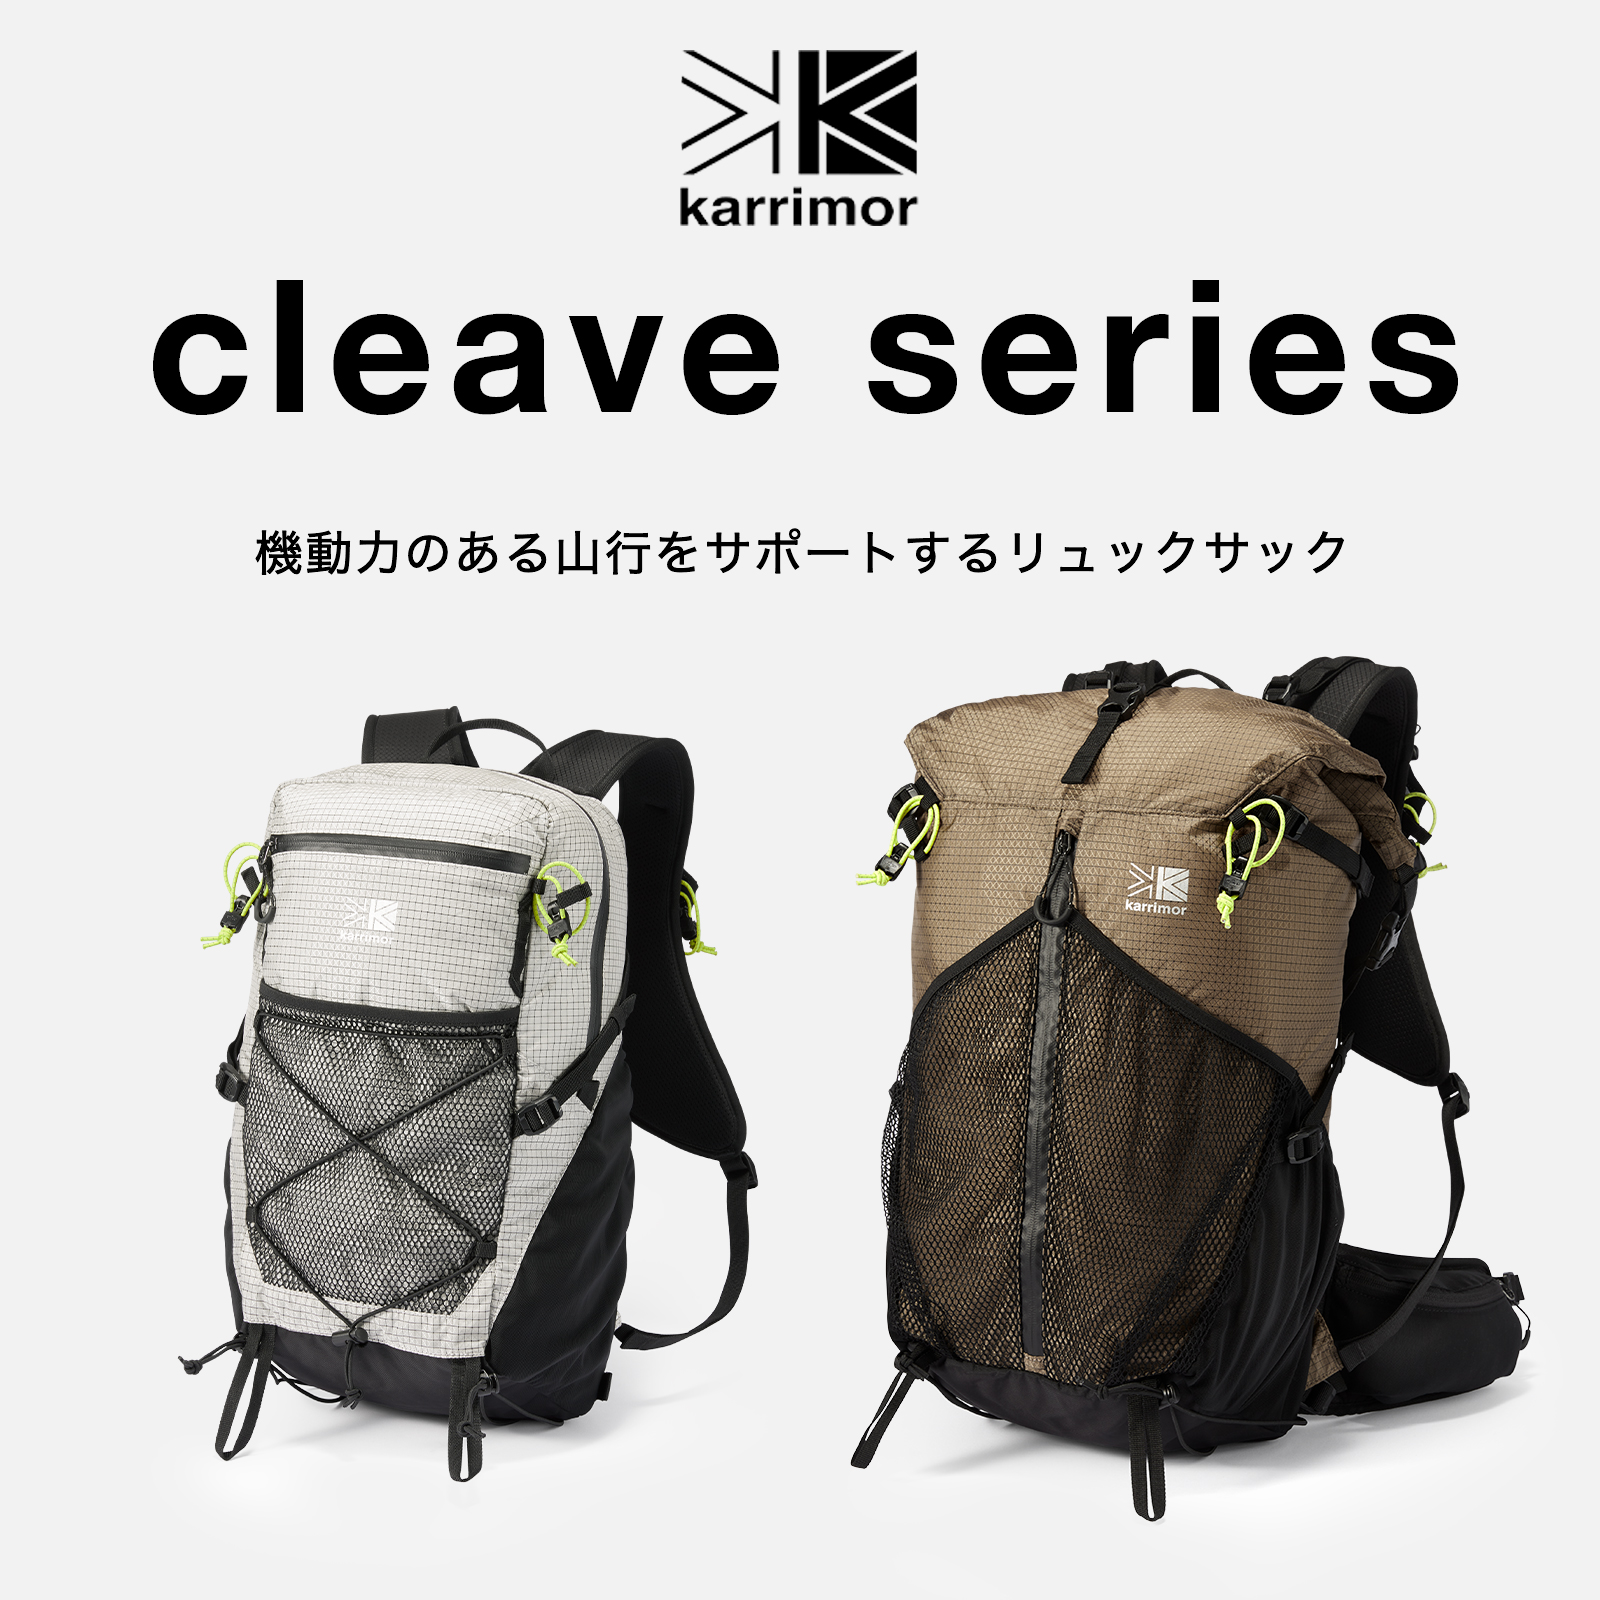 〈cleave-クリーブ-〉新発売